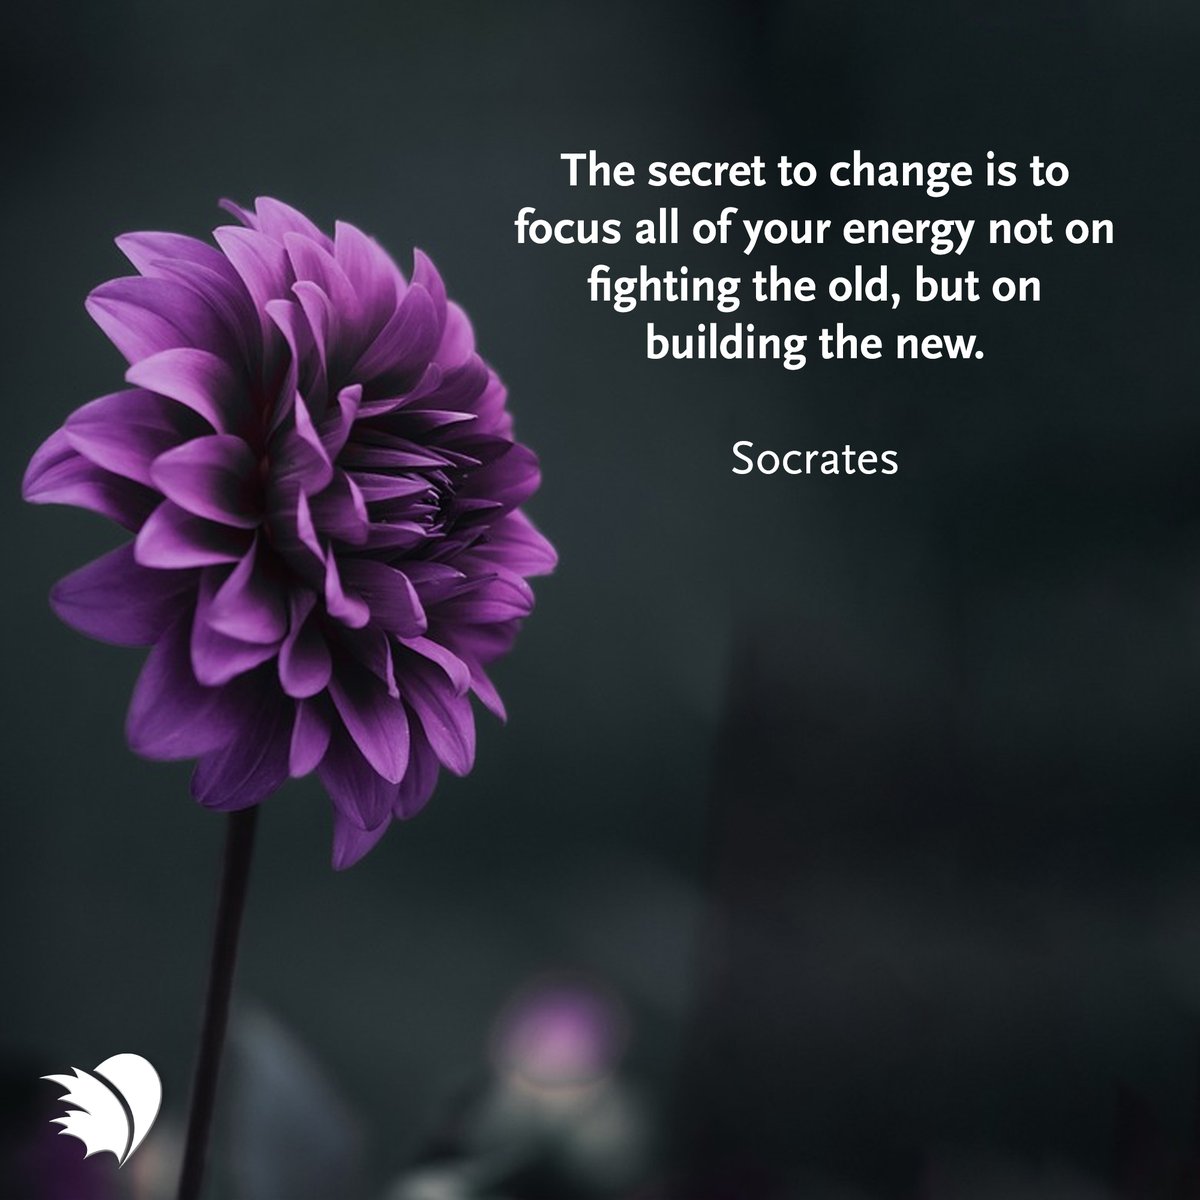 The secret to change is to focus all of your energy not on fighting the old, but on building the new. #PHACanada #PositiveVibes #PositiveQuote #PHcommunity #MotivationalQuotes